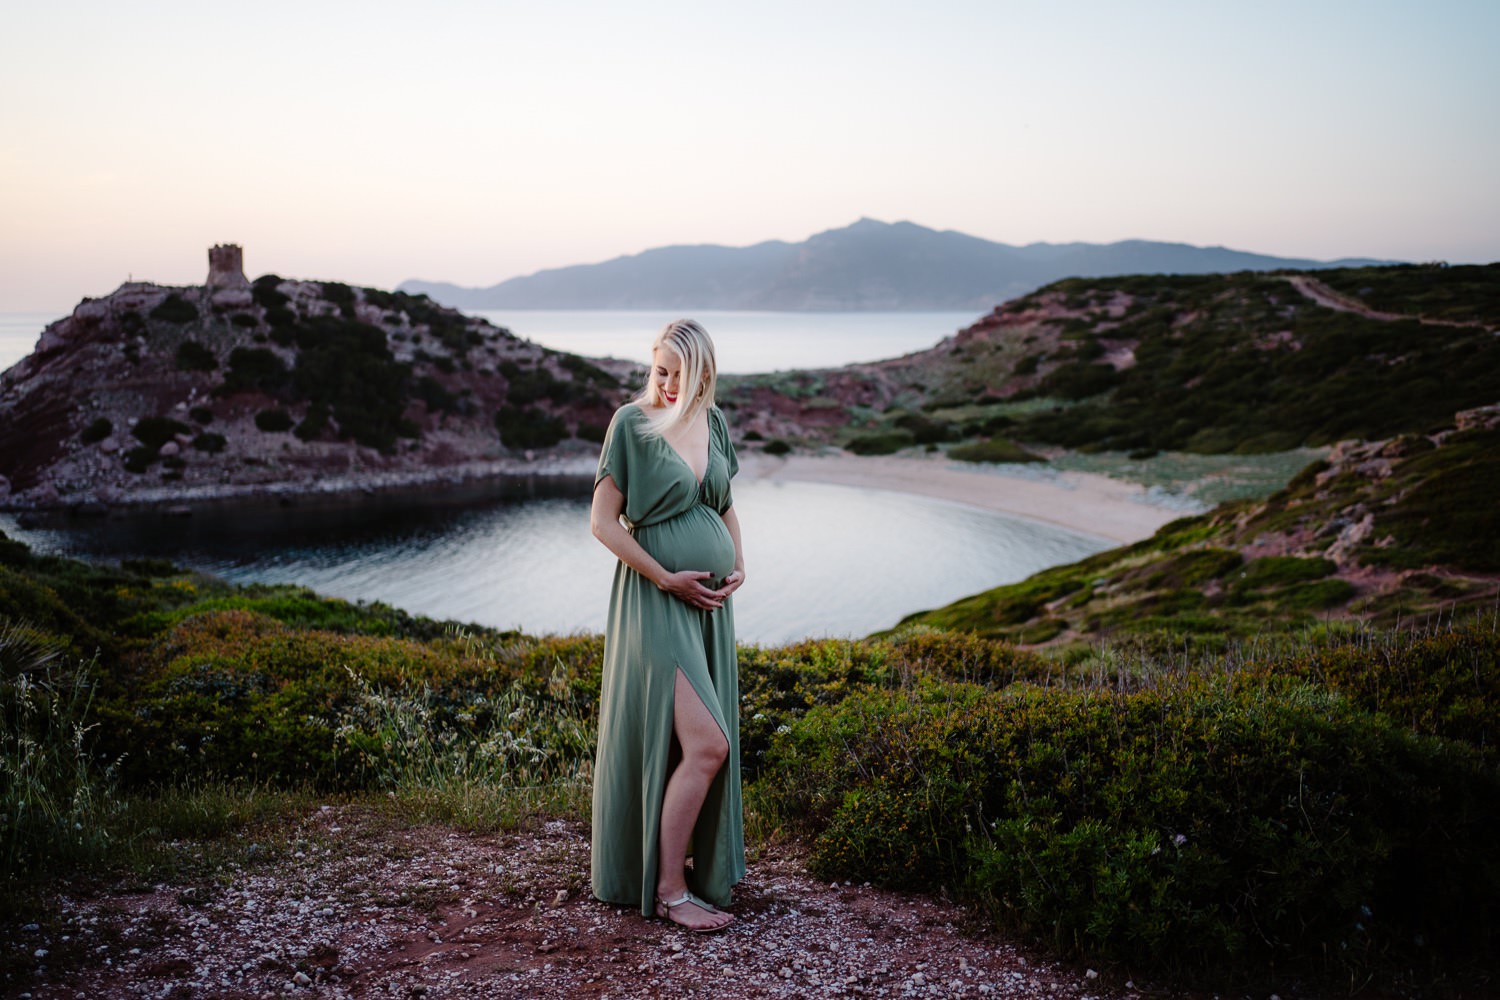 A heartwarming maternity photo taken in the picturesque town of Alghero. The mother-to-be is sitting on a stone staircase, looking down at her belly, with her husband standing next to her, holding her hand and looking at her lovingly.